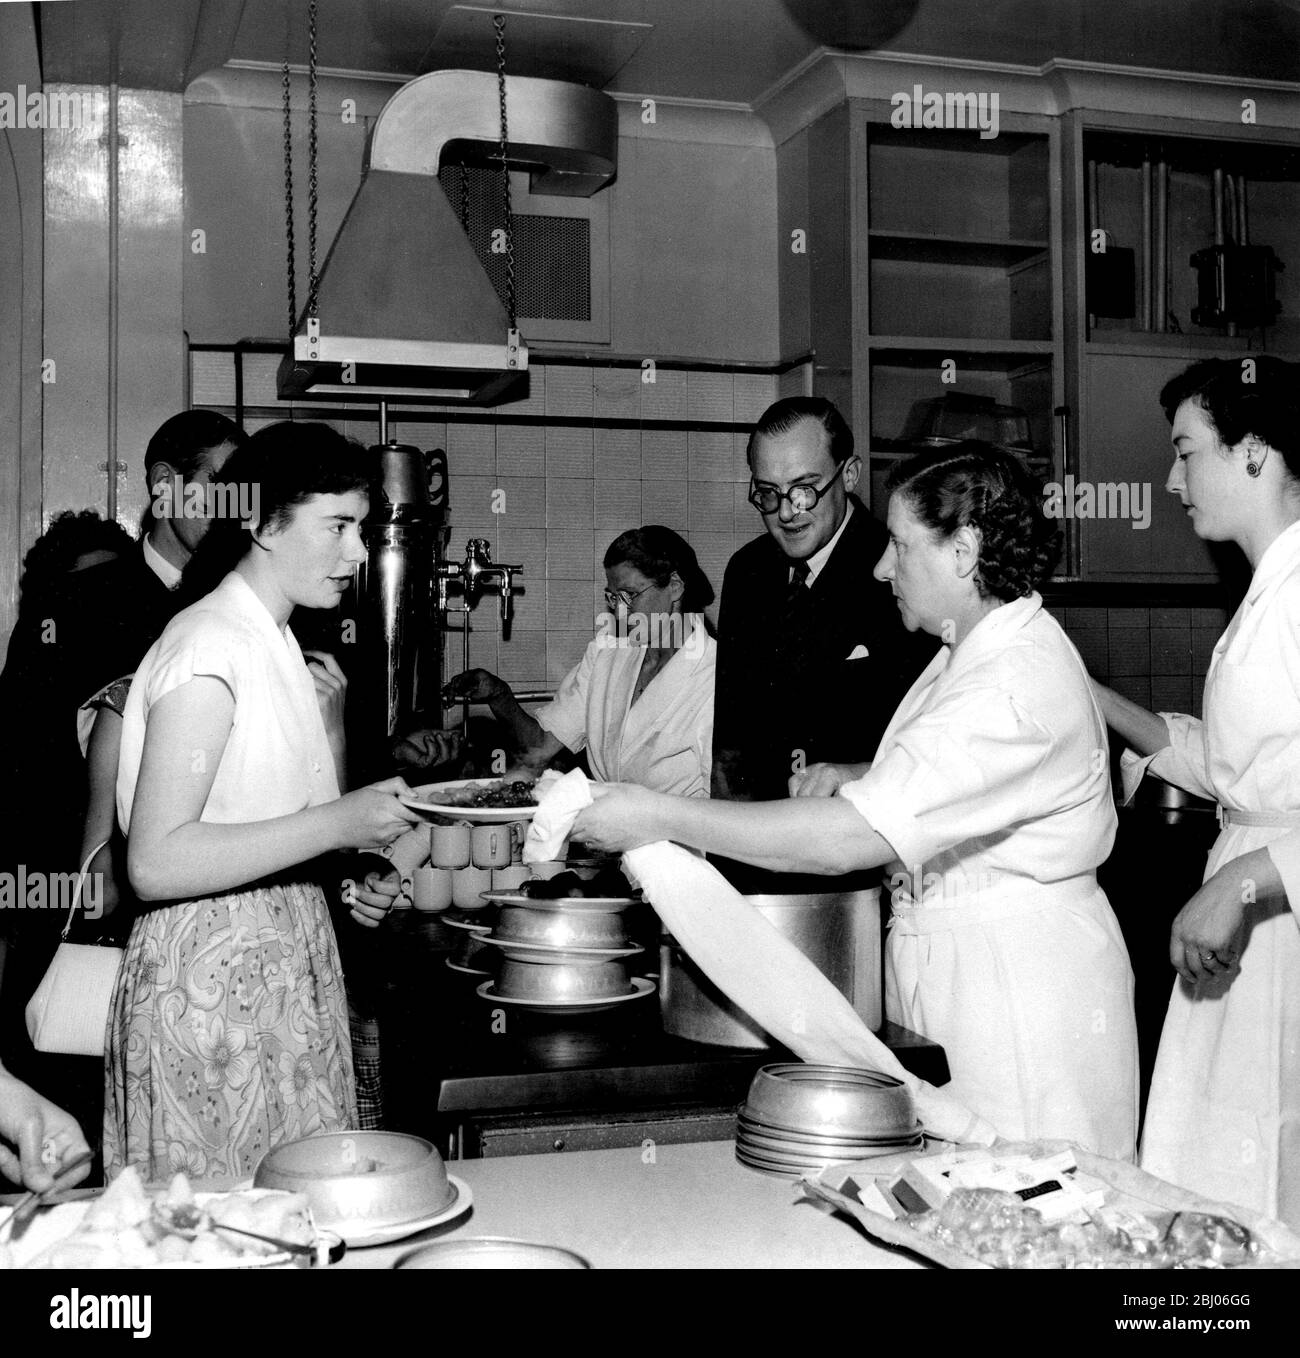 Nigel Radcliffe tours the world perfect kitchens and installs everything from a complete kitchen to a grill capable of cooking a steak in sixty seconds. He is seen here watching serving staff at a canteen in London where his equipment is in use. - 1954 Stock Photo